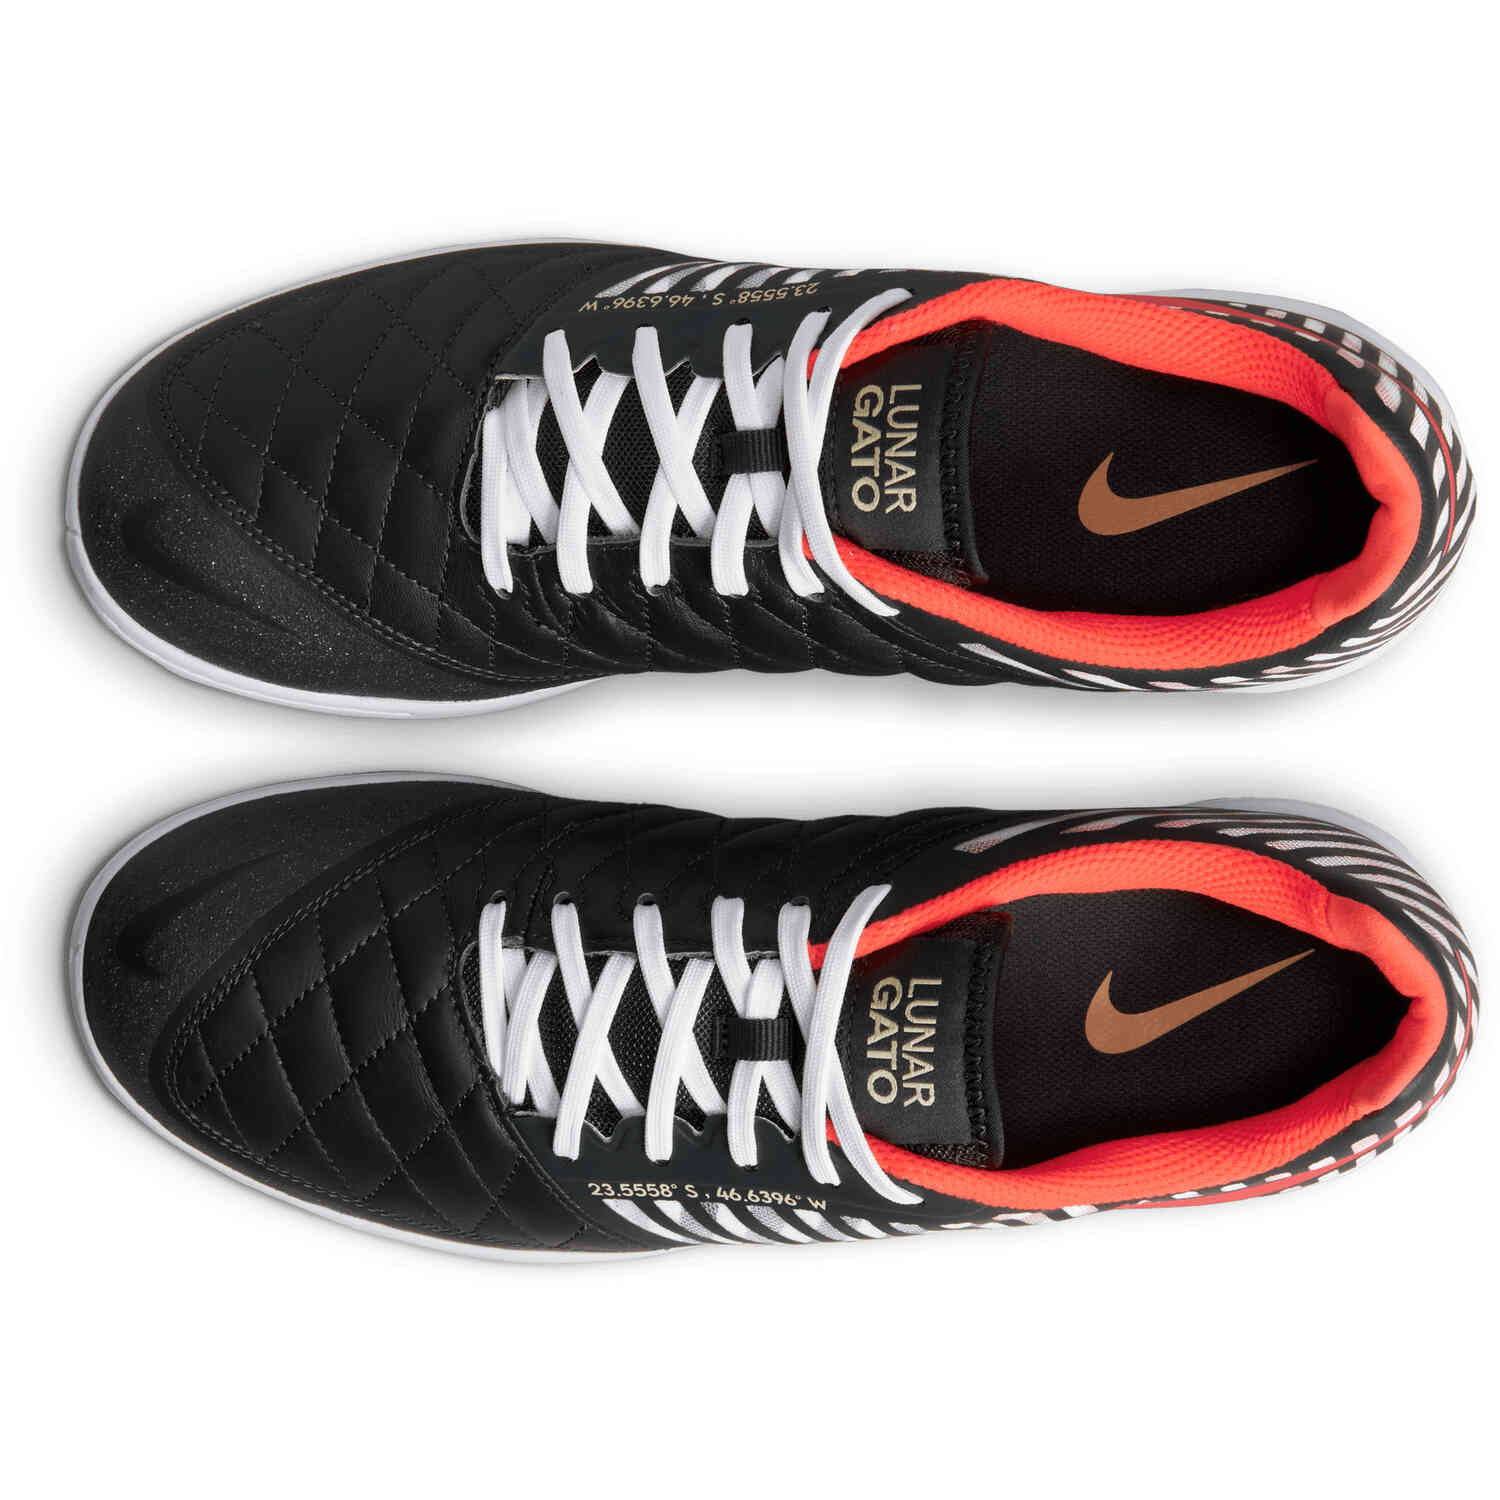 Nike Lunargato II IC – Anthracite & Infrared 23 with White with Team Gold